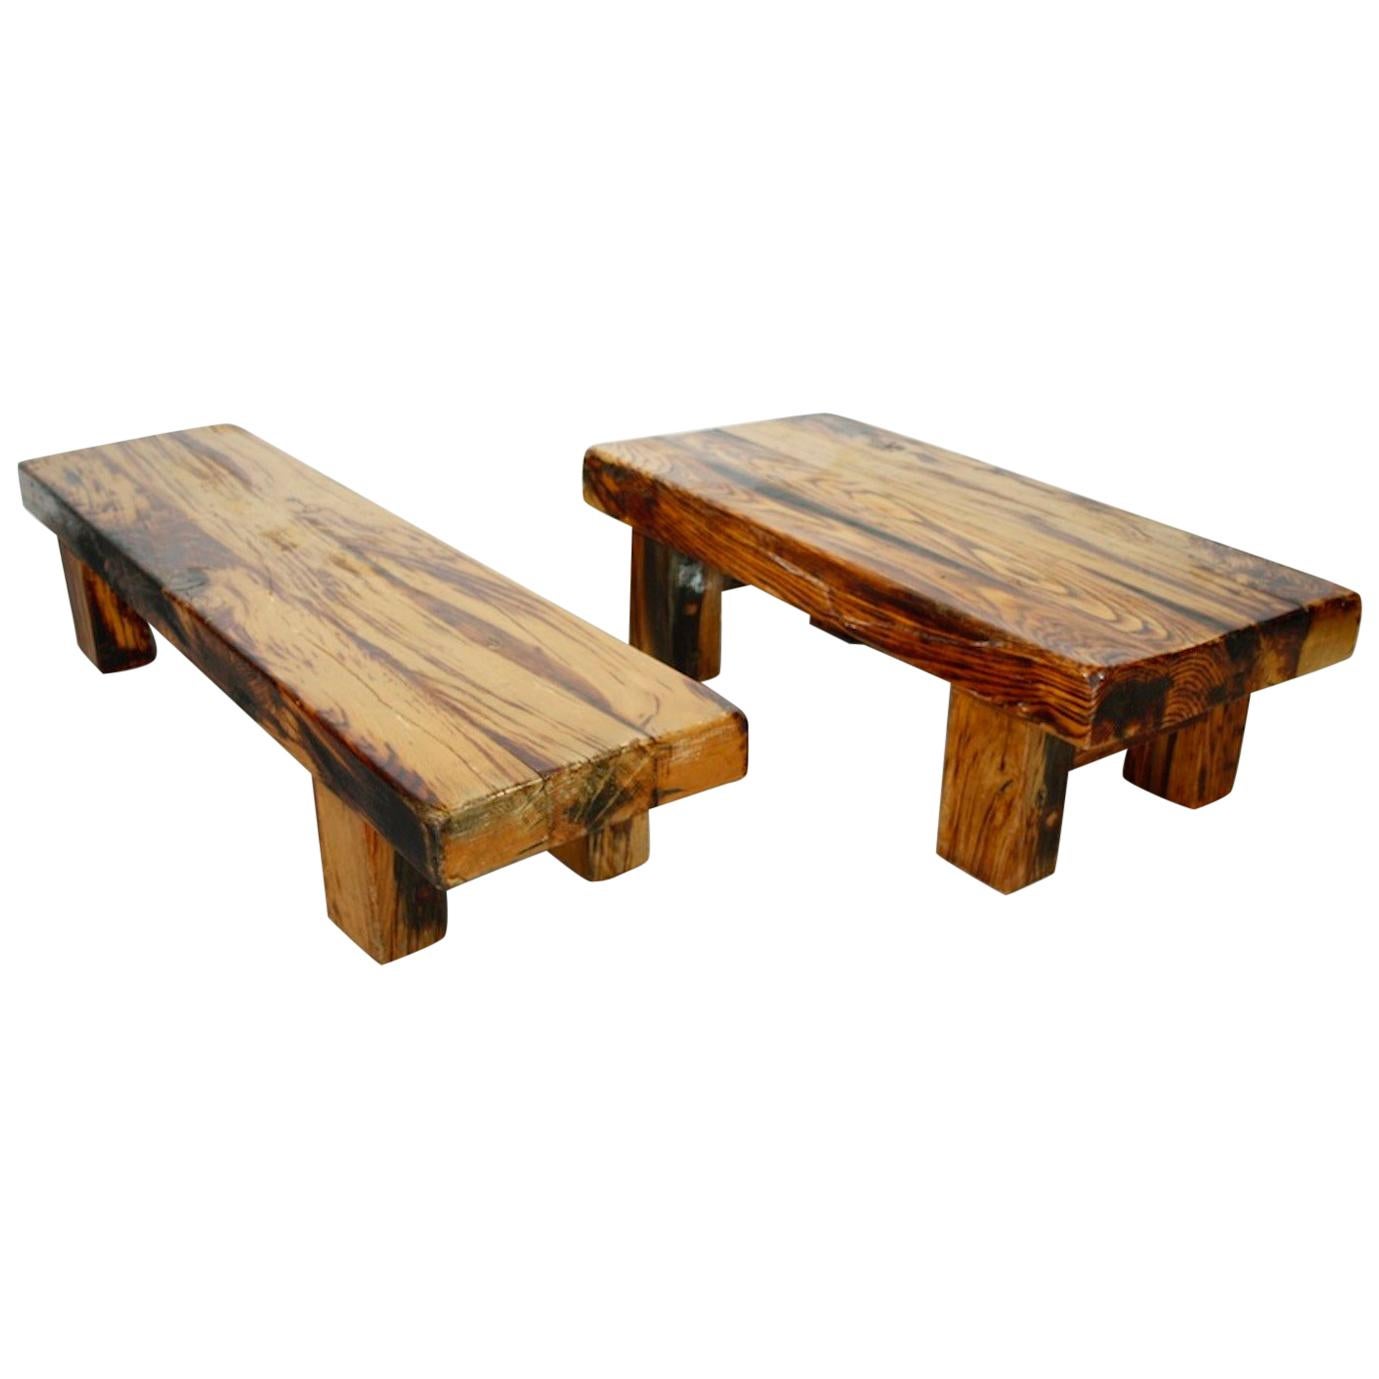 Two Charlotte Perriand Style Brutalist Solid Oak Benches or Tables, France 1950s